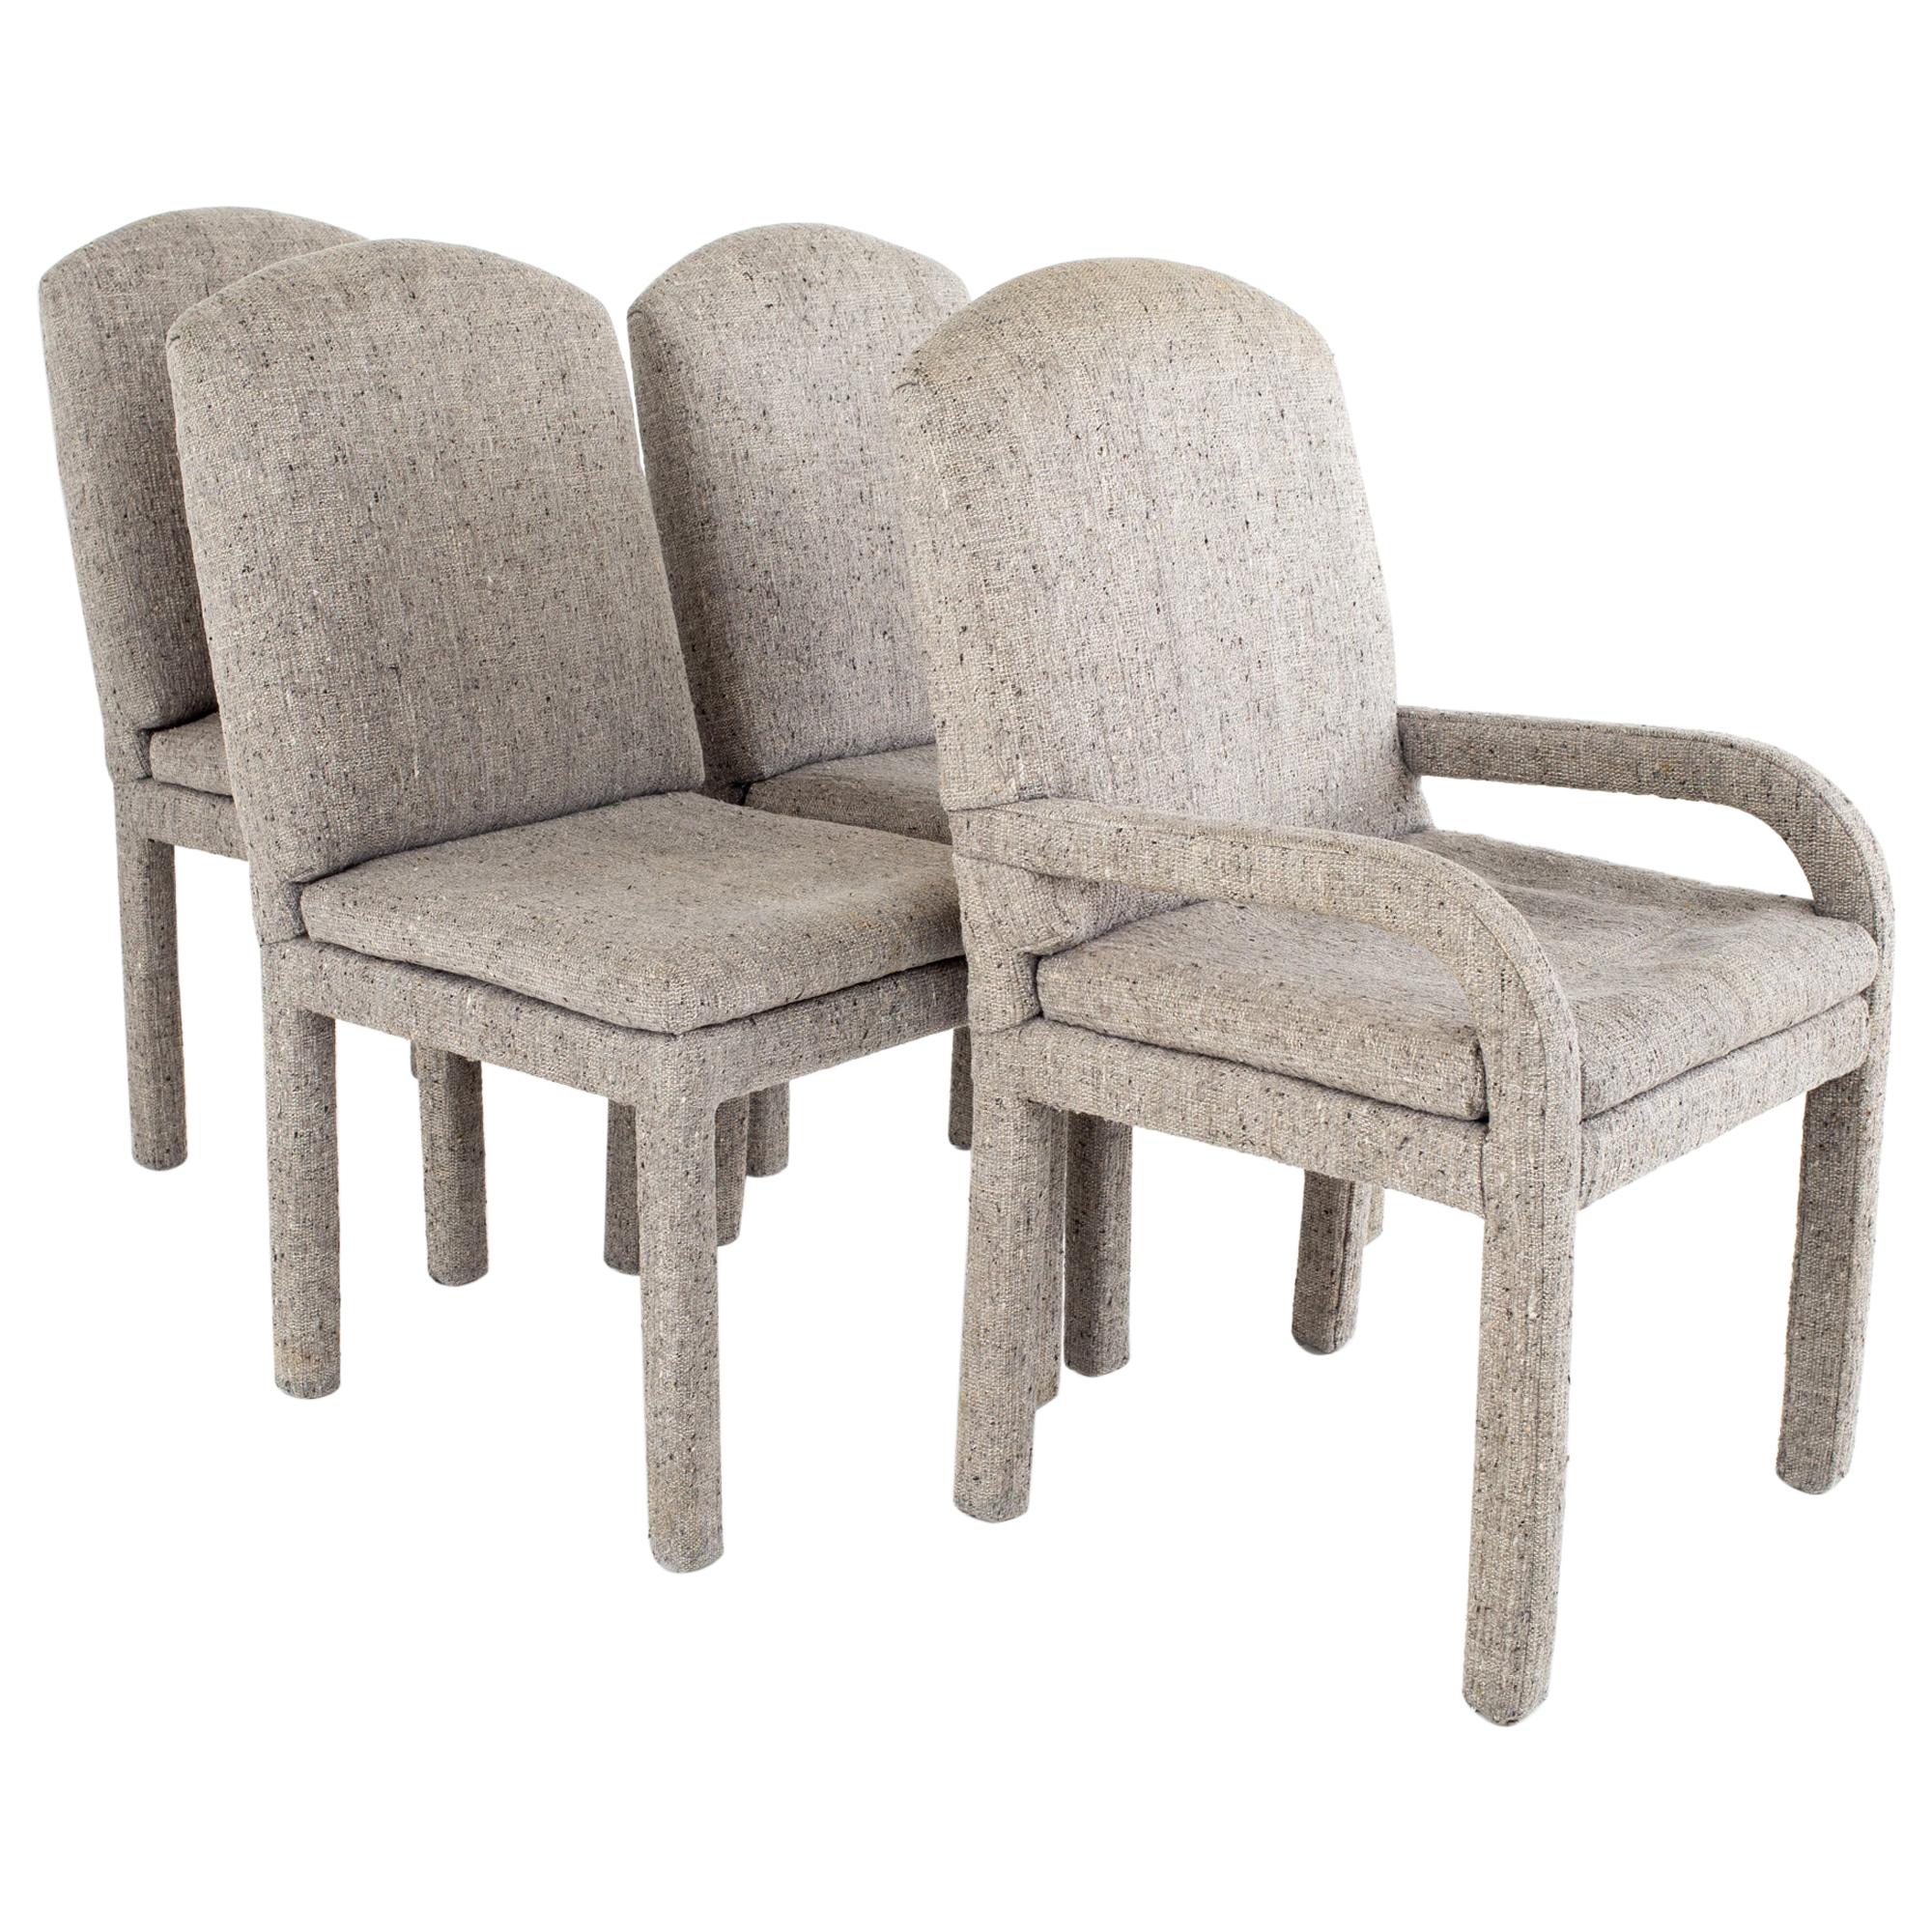 Milo Baughman Style Mid Century Grey Parsons Chairs, Set of 4